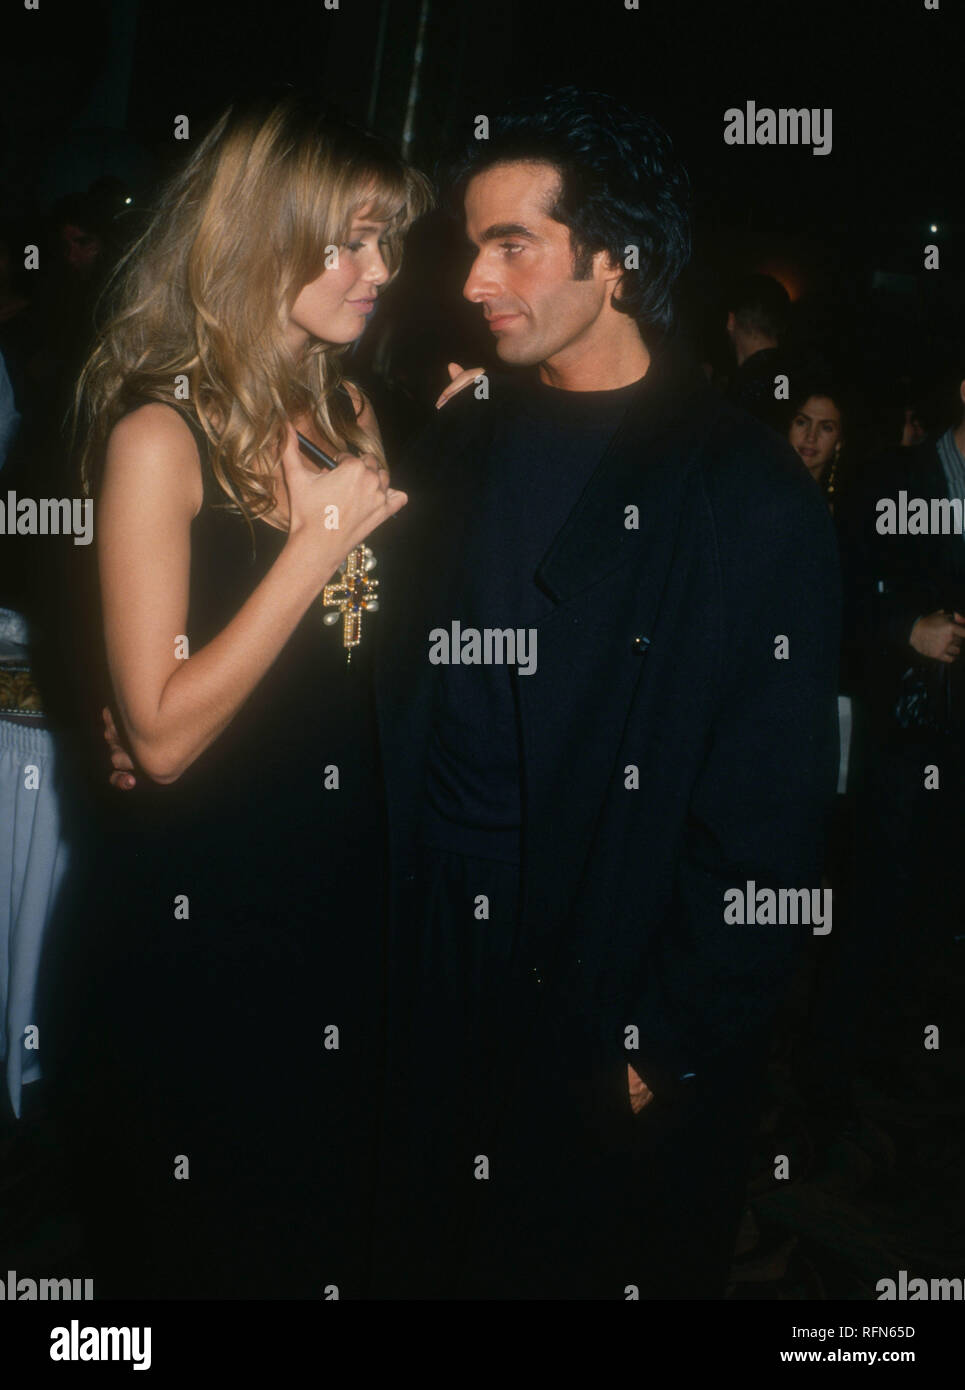 LOS ANGELES, CA - NOVEMBER 10: Model Claudia Schiffer and Magician David Copperfield attend David Copperfield's Magic Show to Benefit the Starlight Children's Foundation on on November 10, 1993 at the Wiltern Theatre in Los Angeles, California. Photo by Barry King/Alamy Stock Photo Stock Photo